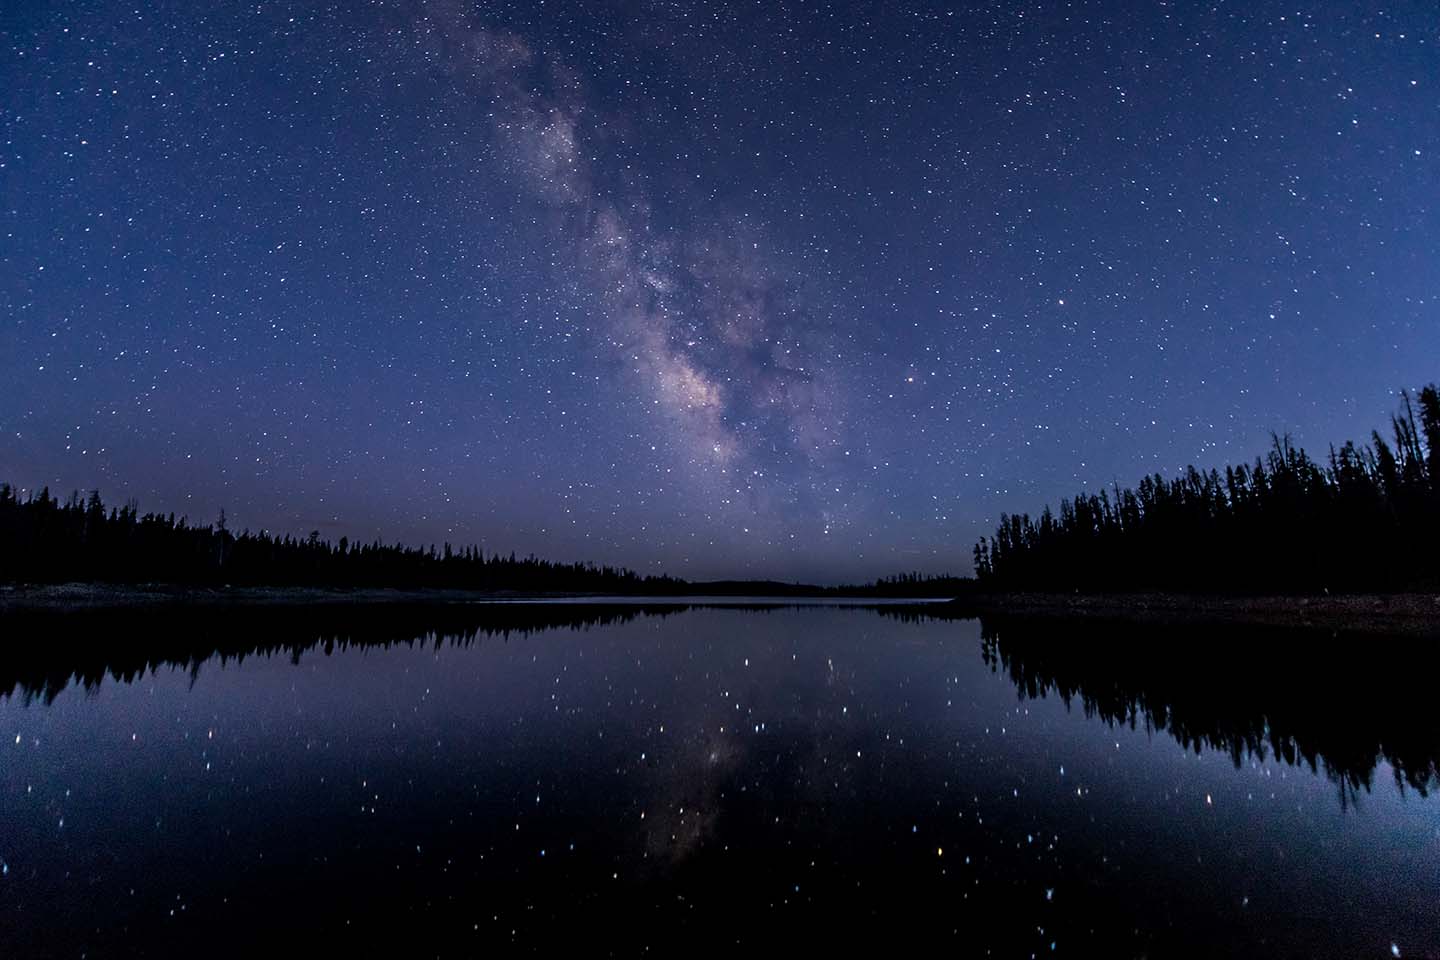 Night sky with stars reflected in a lake